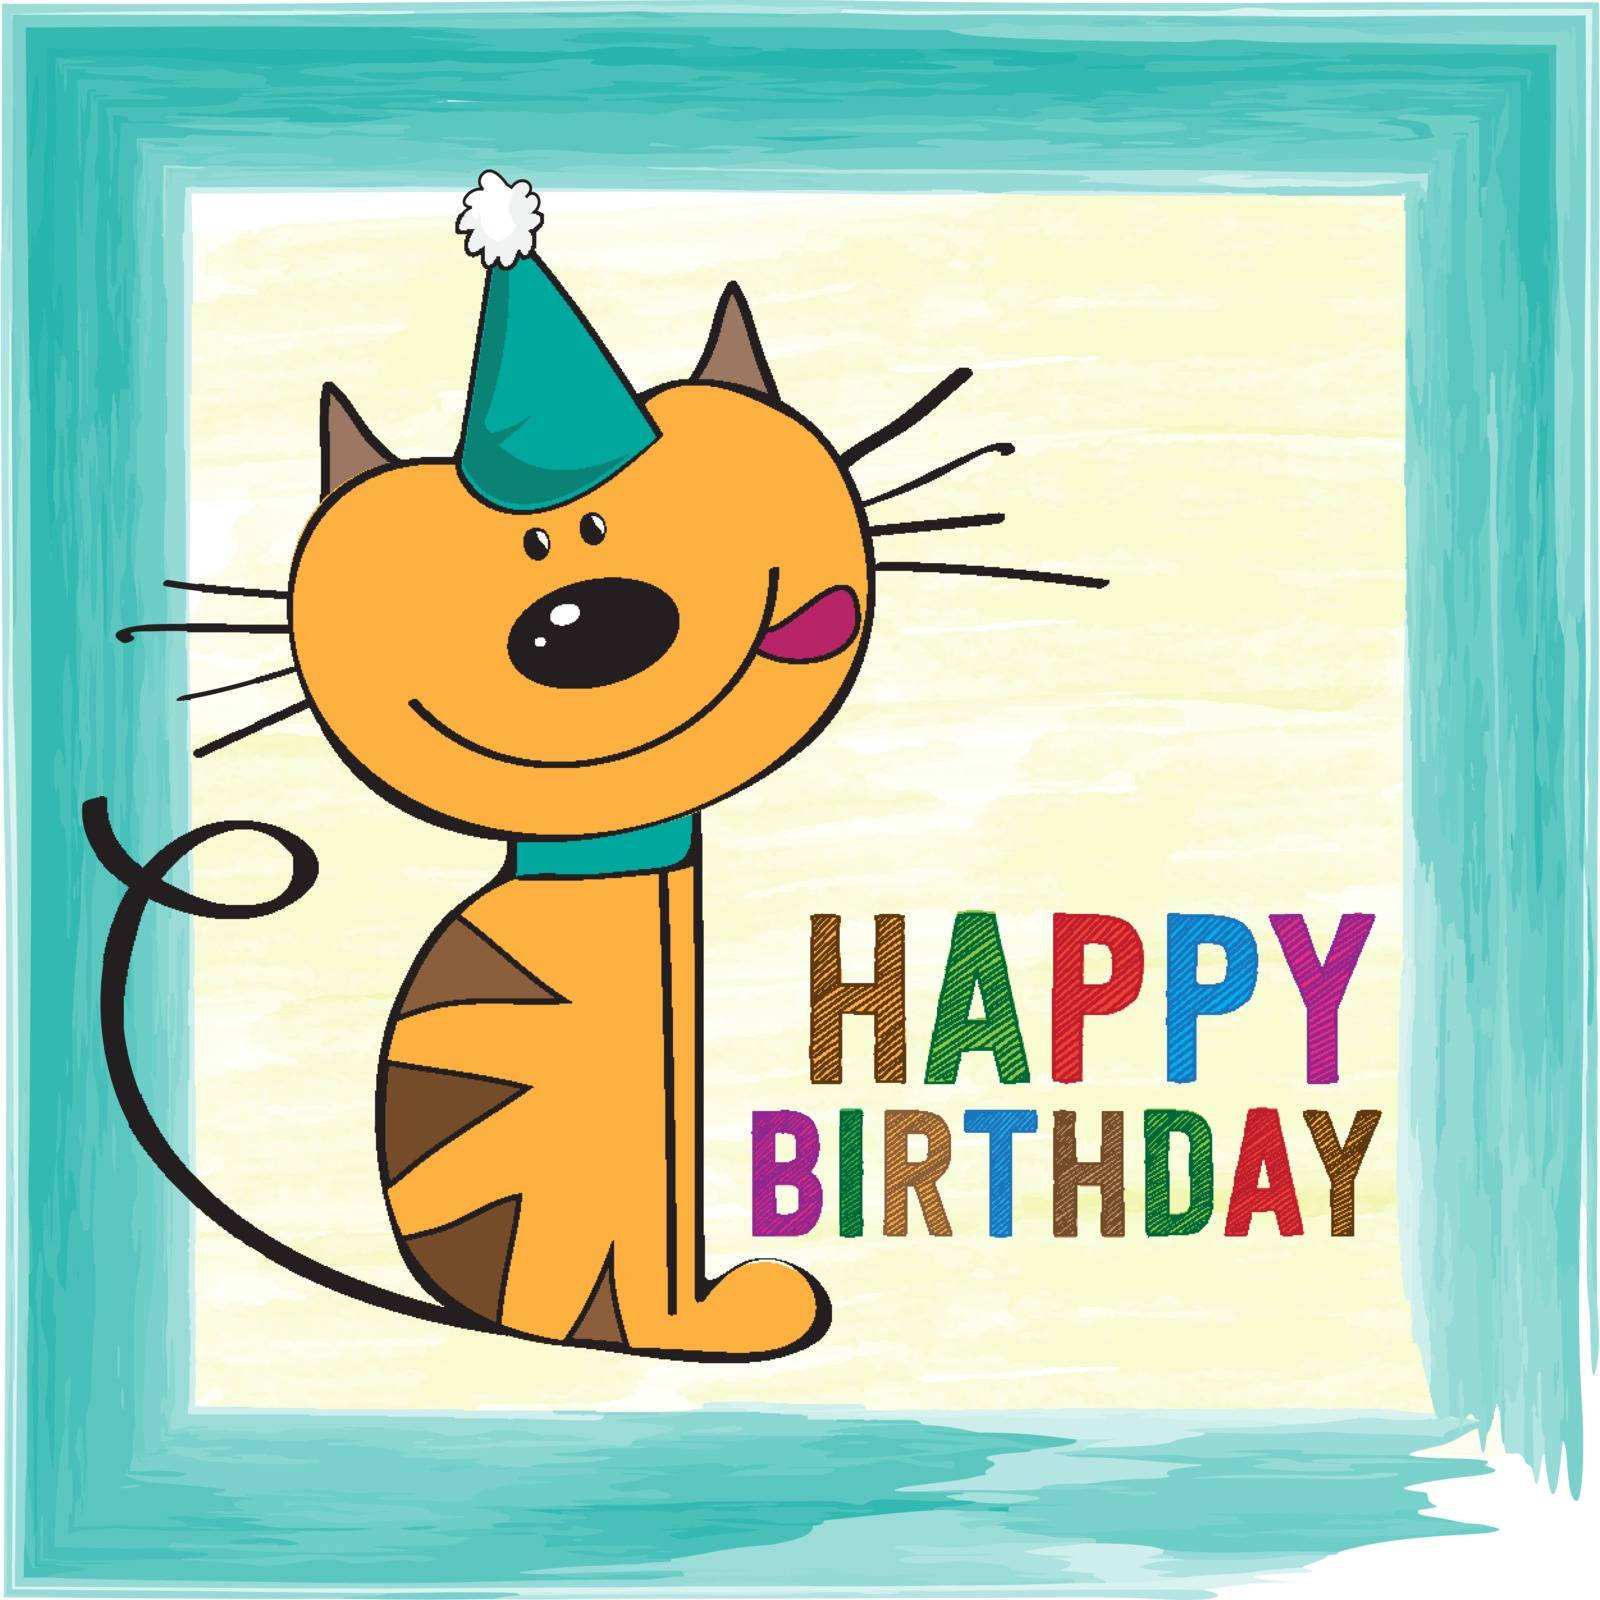 childish birthday card with funny little cat, vector format